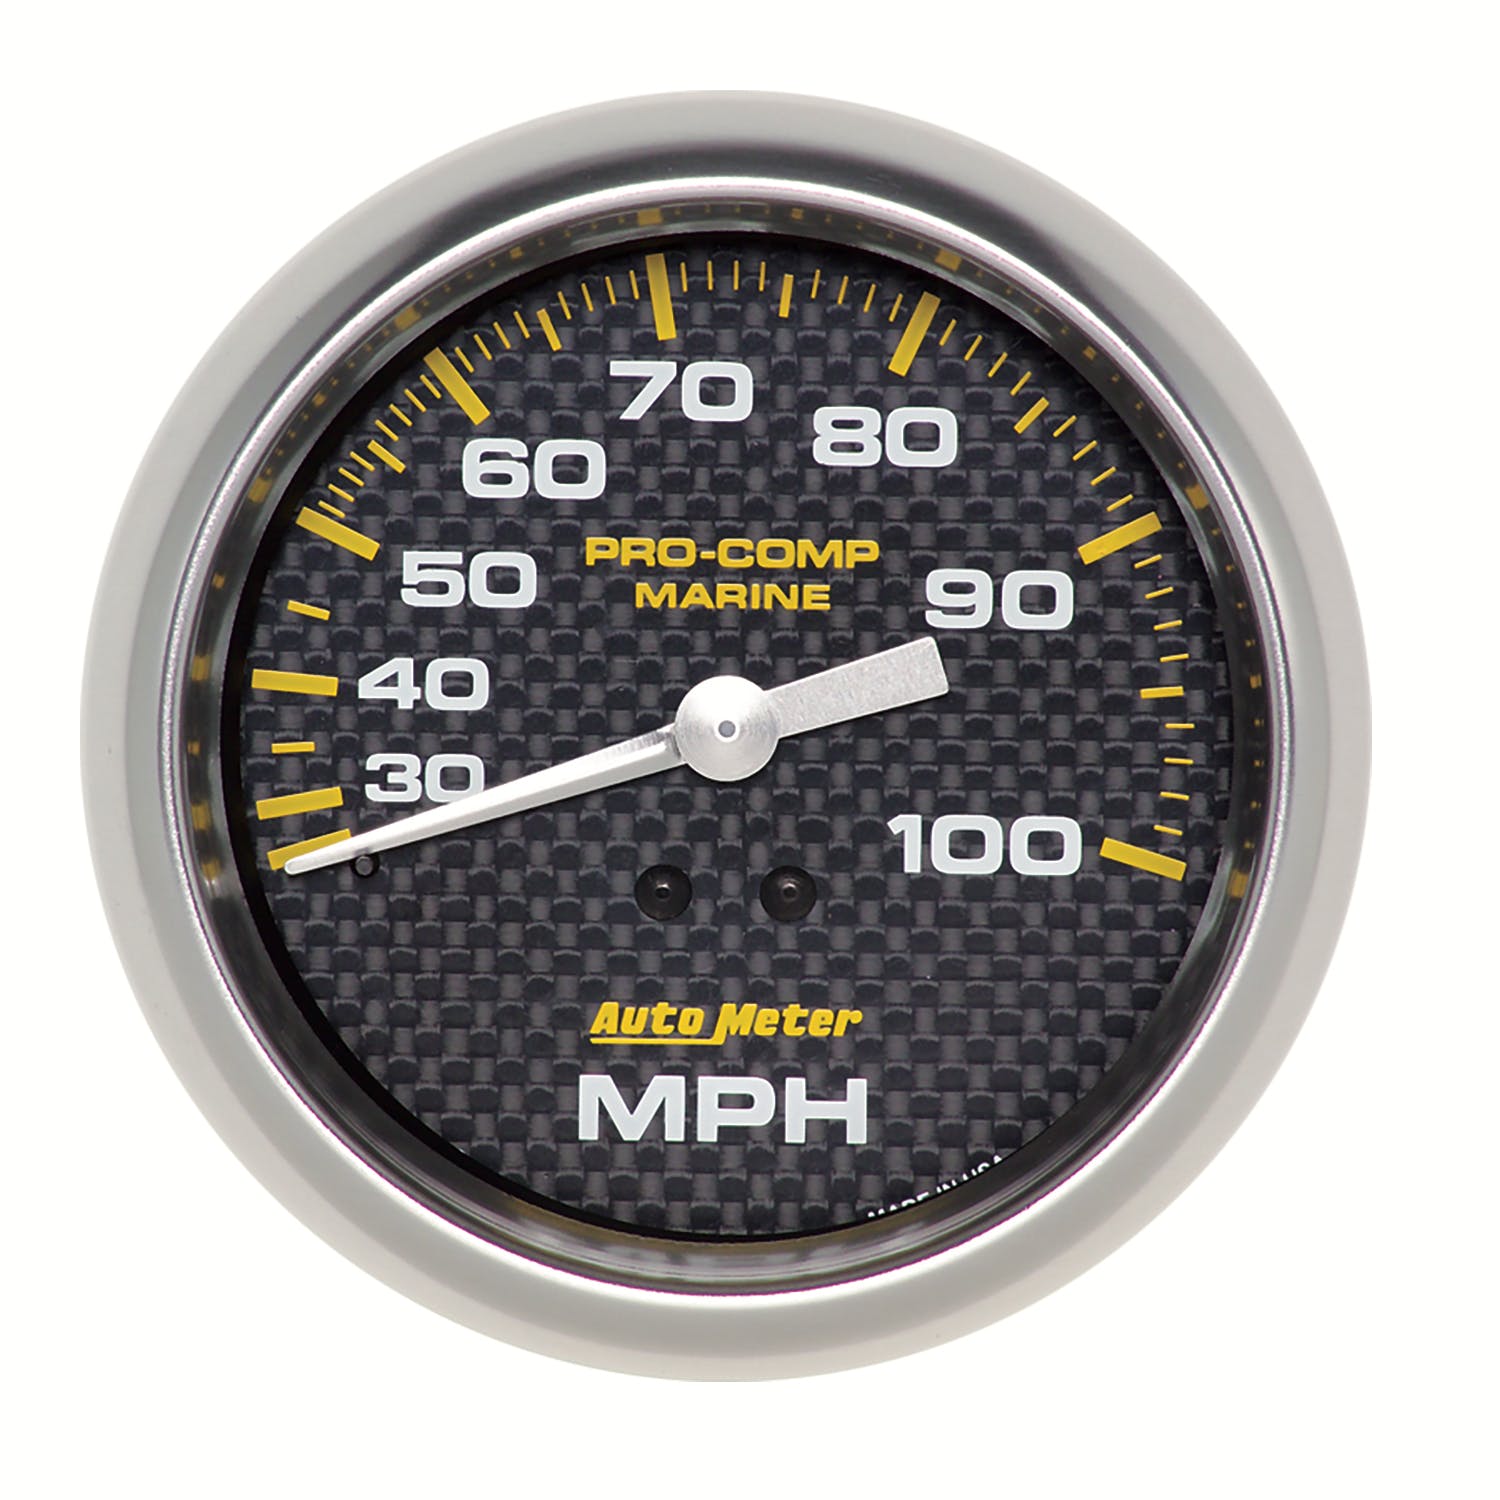 AutoMeter Products 200754-40 Gauge; Speedometer; 3 3/8in.; 100mph; Mechanical; Marine Carbon Fiber